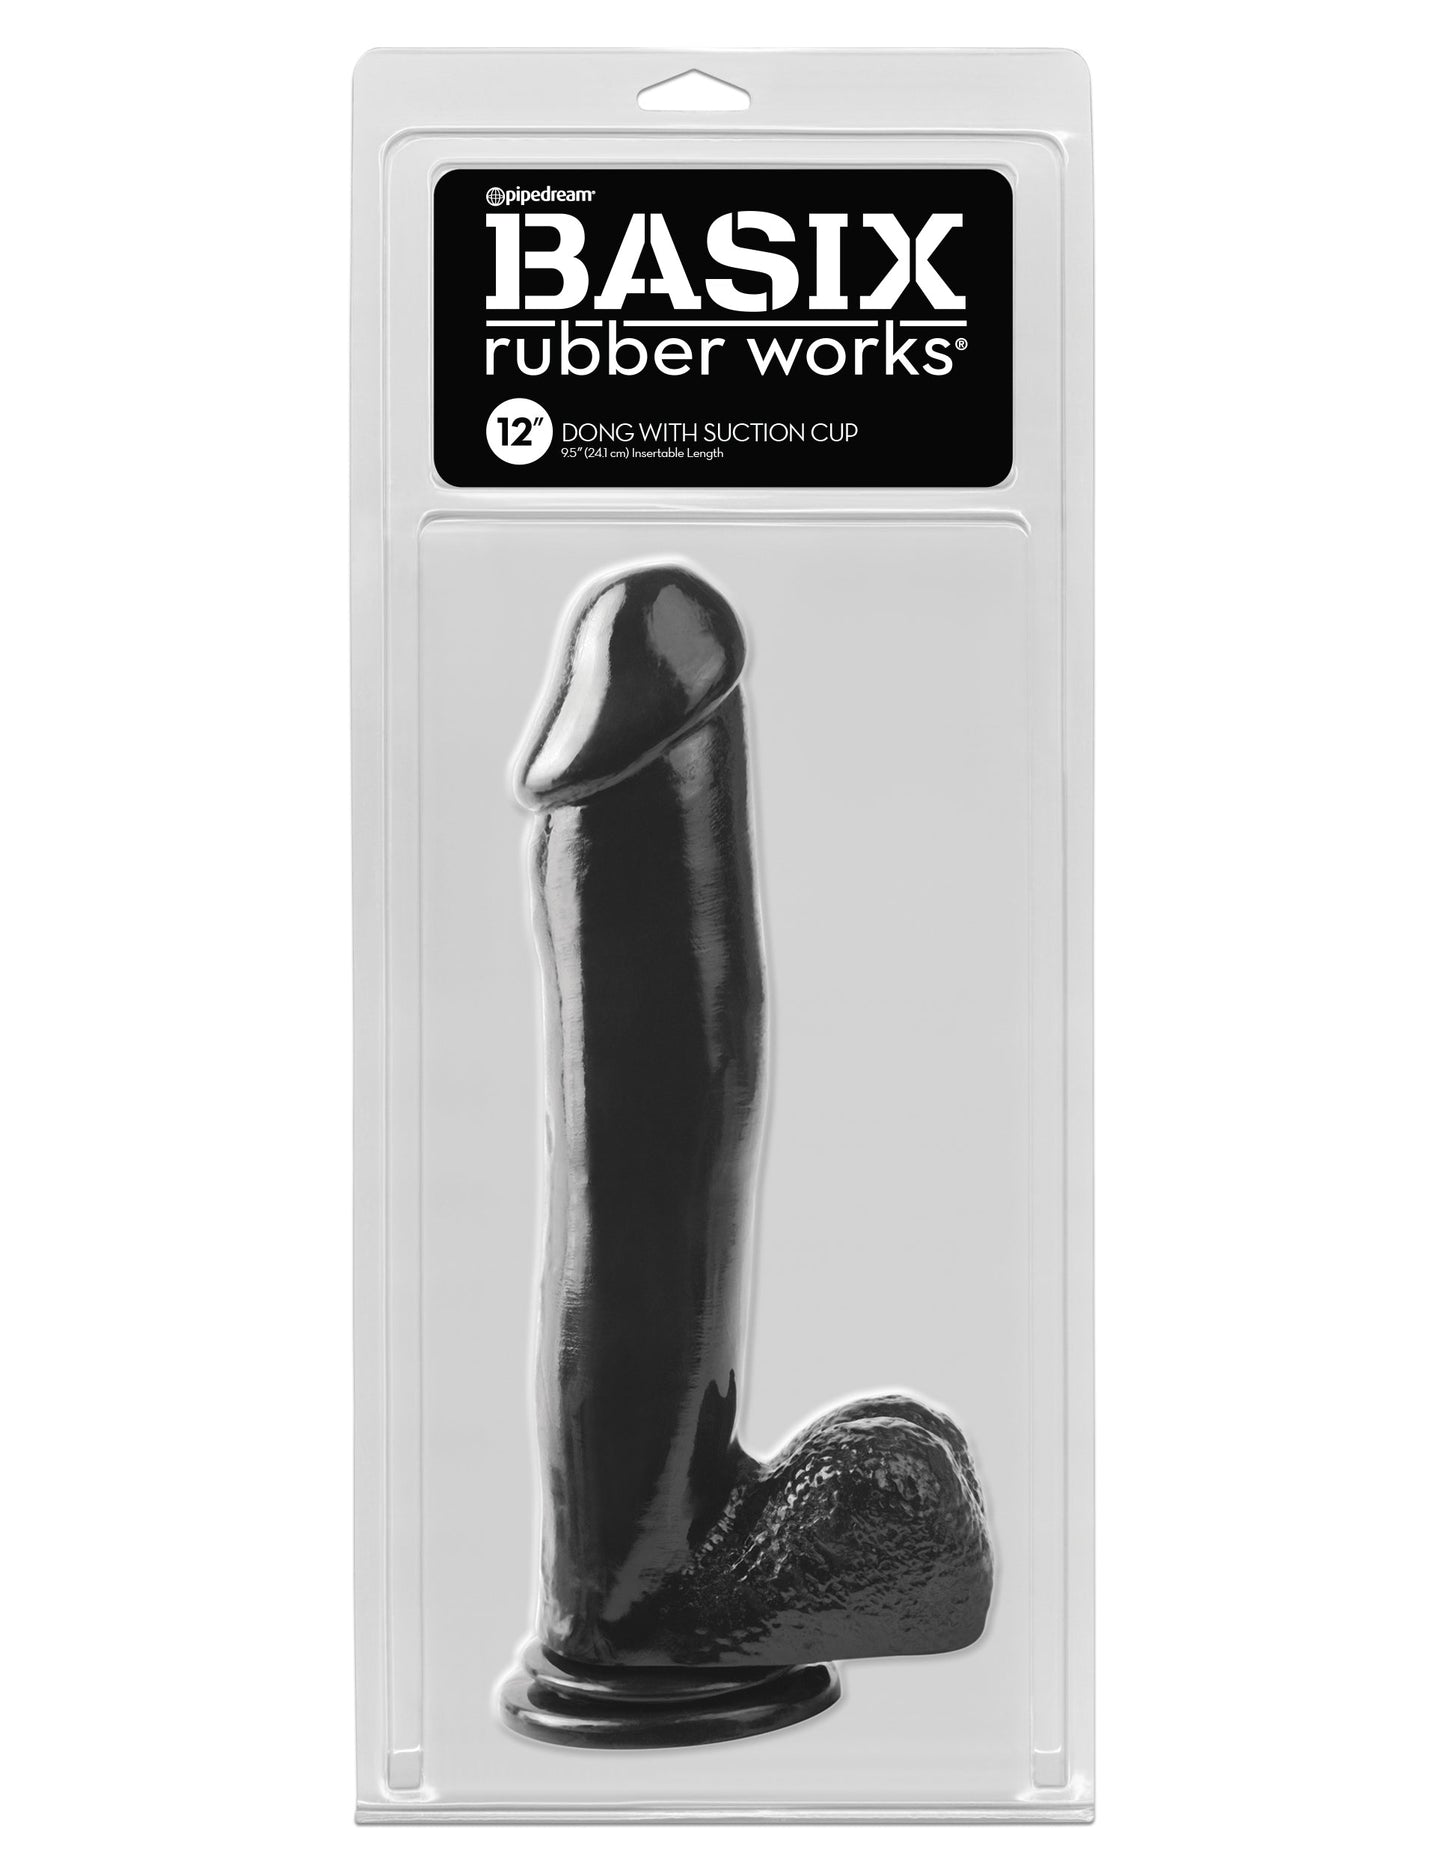 Basix Rubber Works 12" Dong with Suction Cup - Black